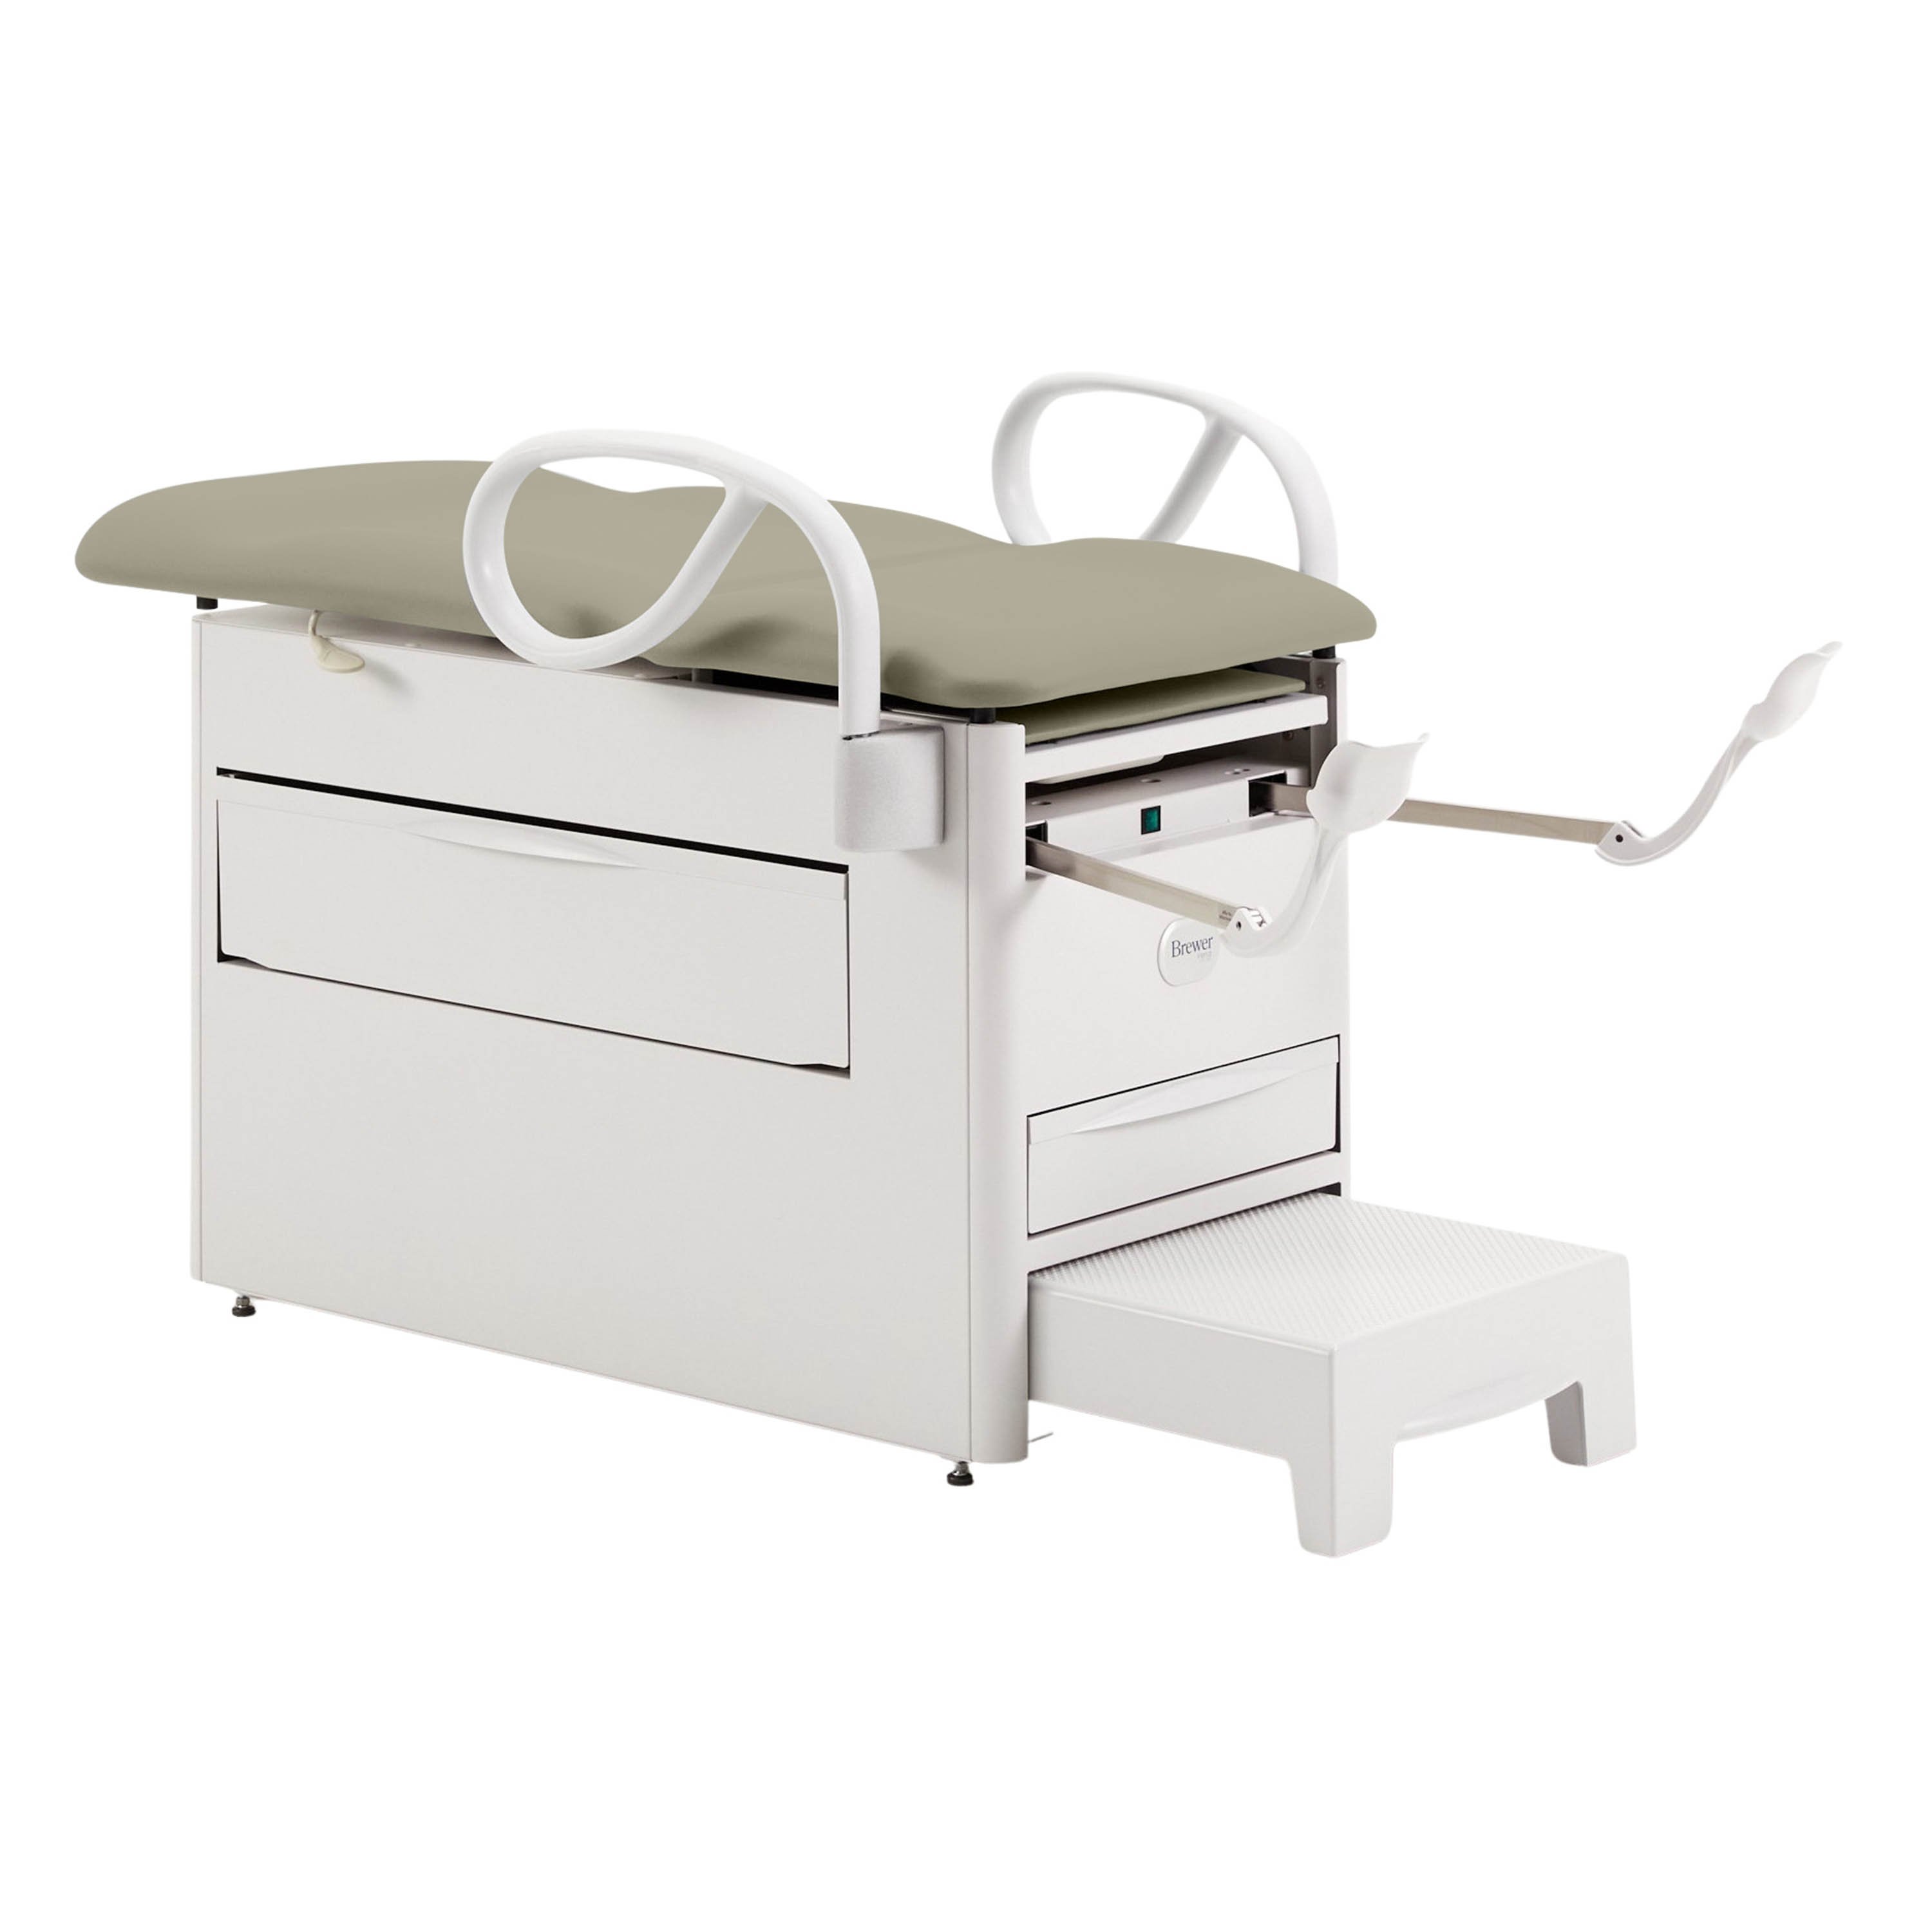 Brewer Versa Exam Table with Patient Assist Handles, Stirrups